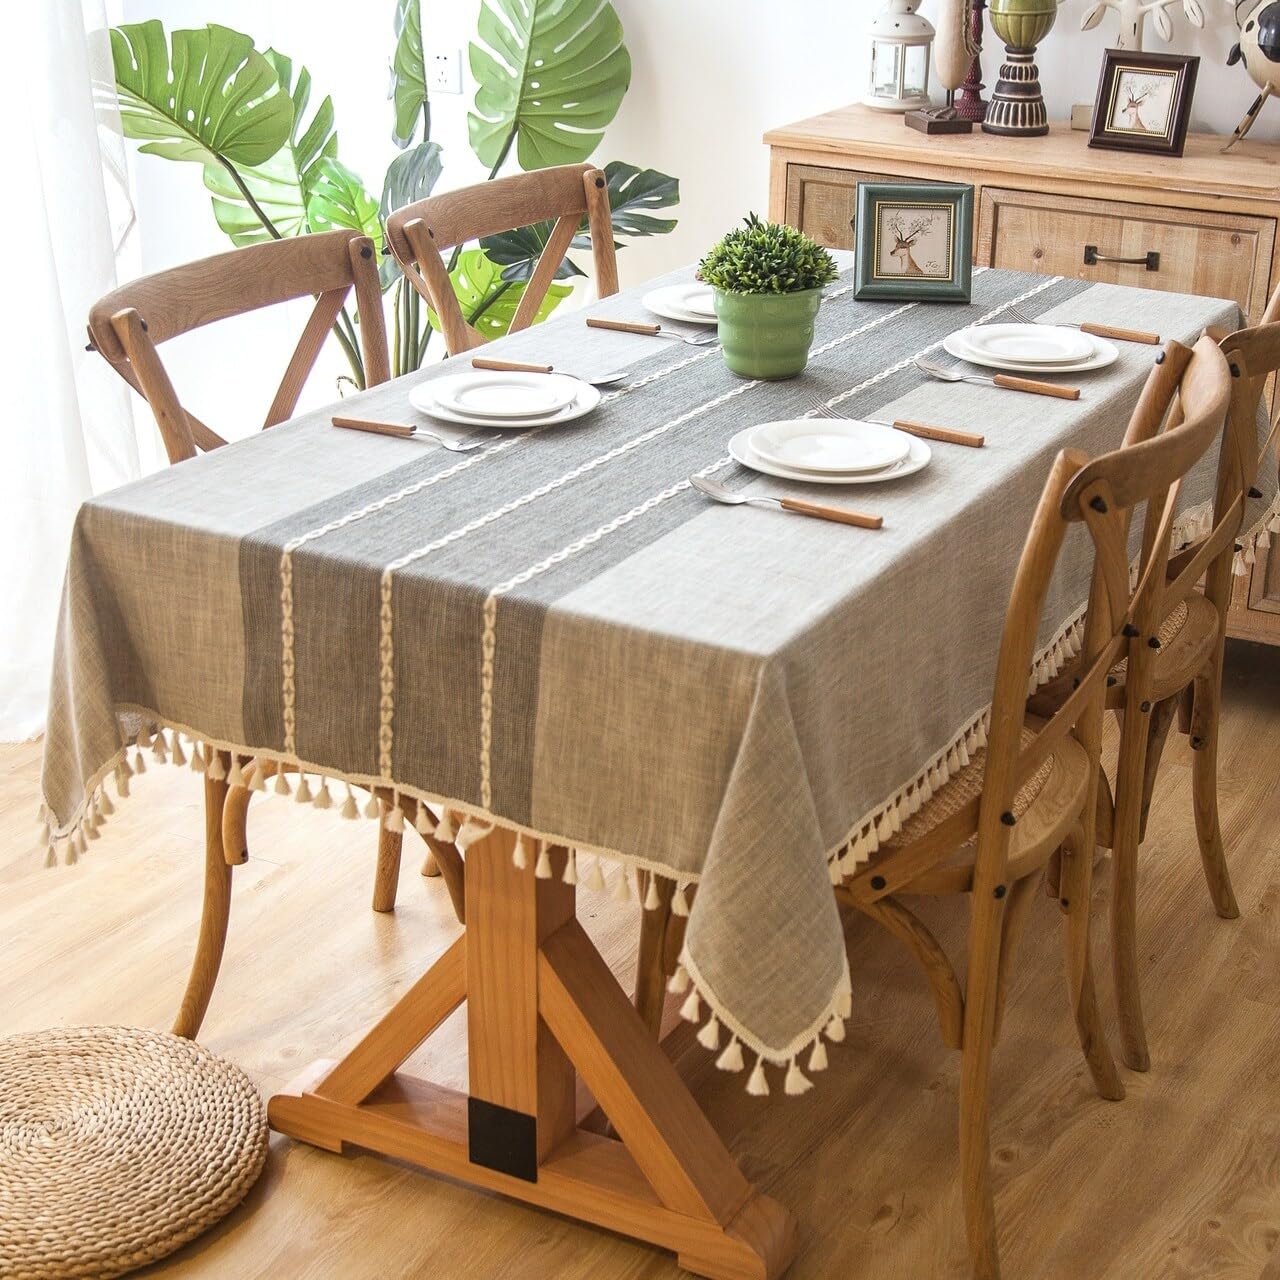 ENOVA HOME Elegant Rectangular Thicken Cotton and Linen Tablecloth with Tassels Dust Proof Table Cover for Kitchen Dinning Tabletop Decoration (Light Grey, 54"x 78")